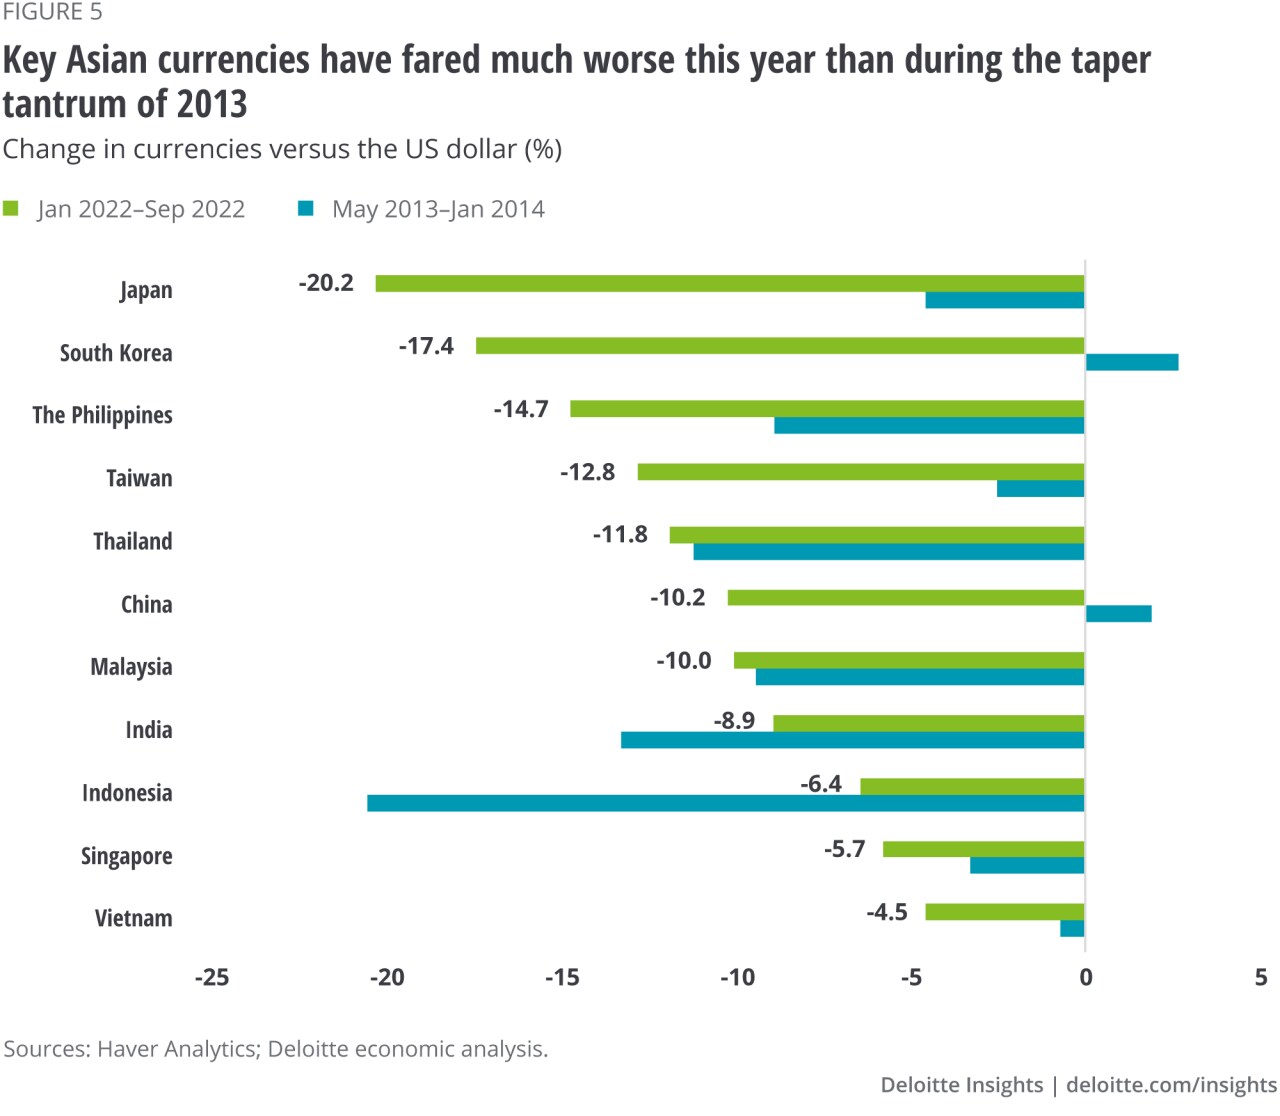 Figure 5. Key Asian currencies have fared much worse this year than during the taper tantrum of 2013